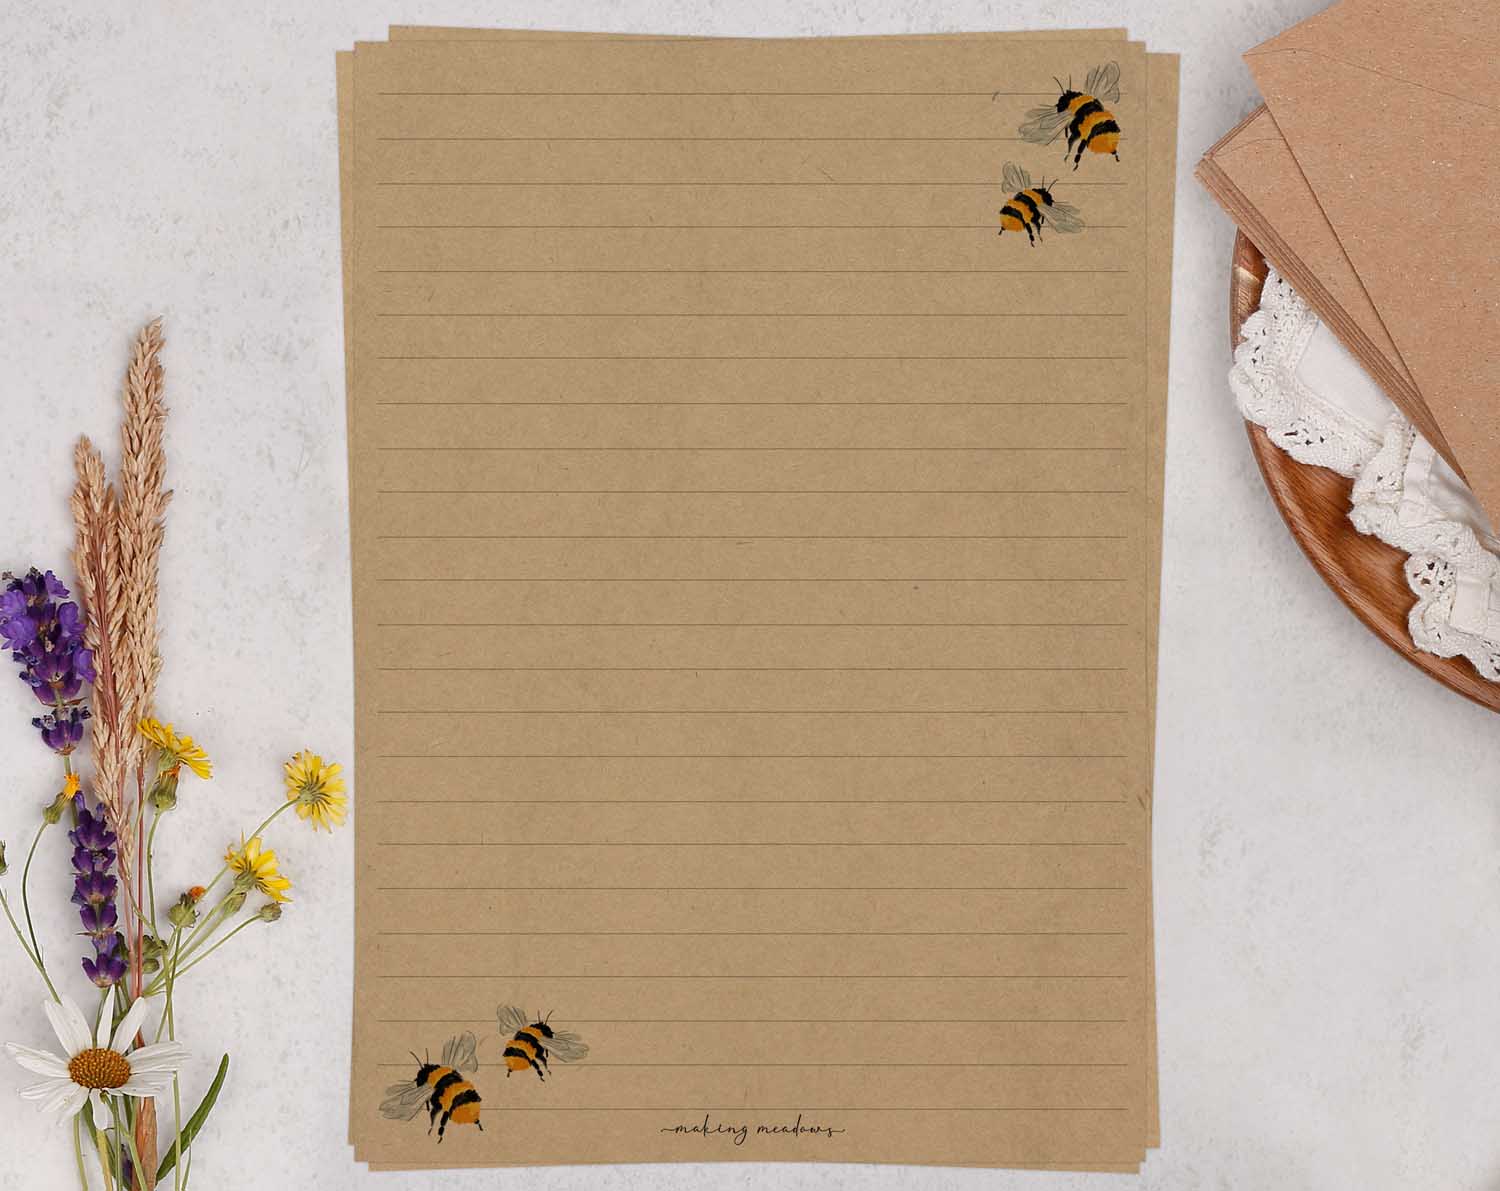 A5 Kraft letter writing paper sheets with a cute bumble bee design.